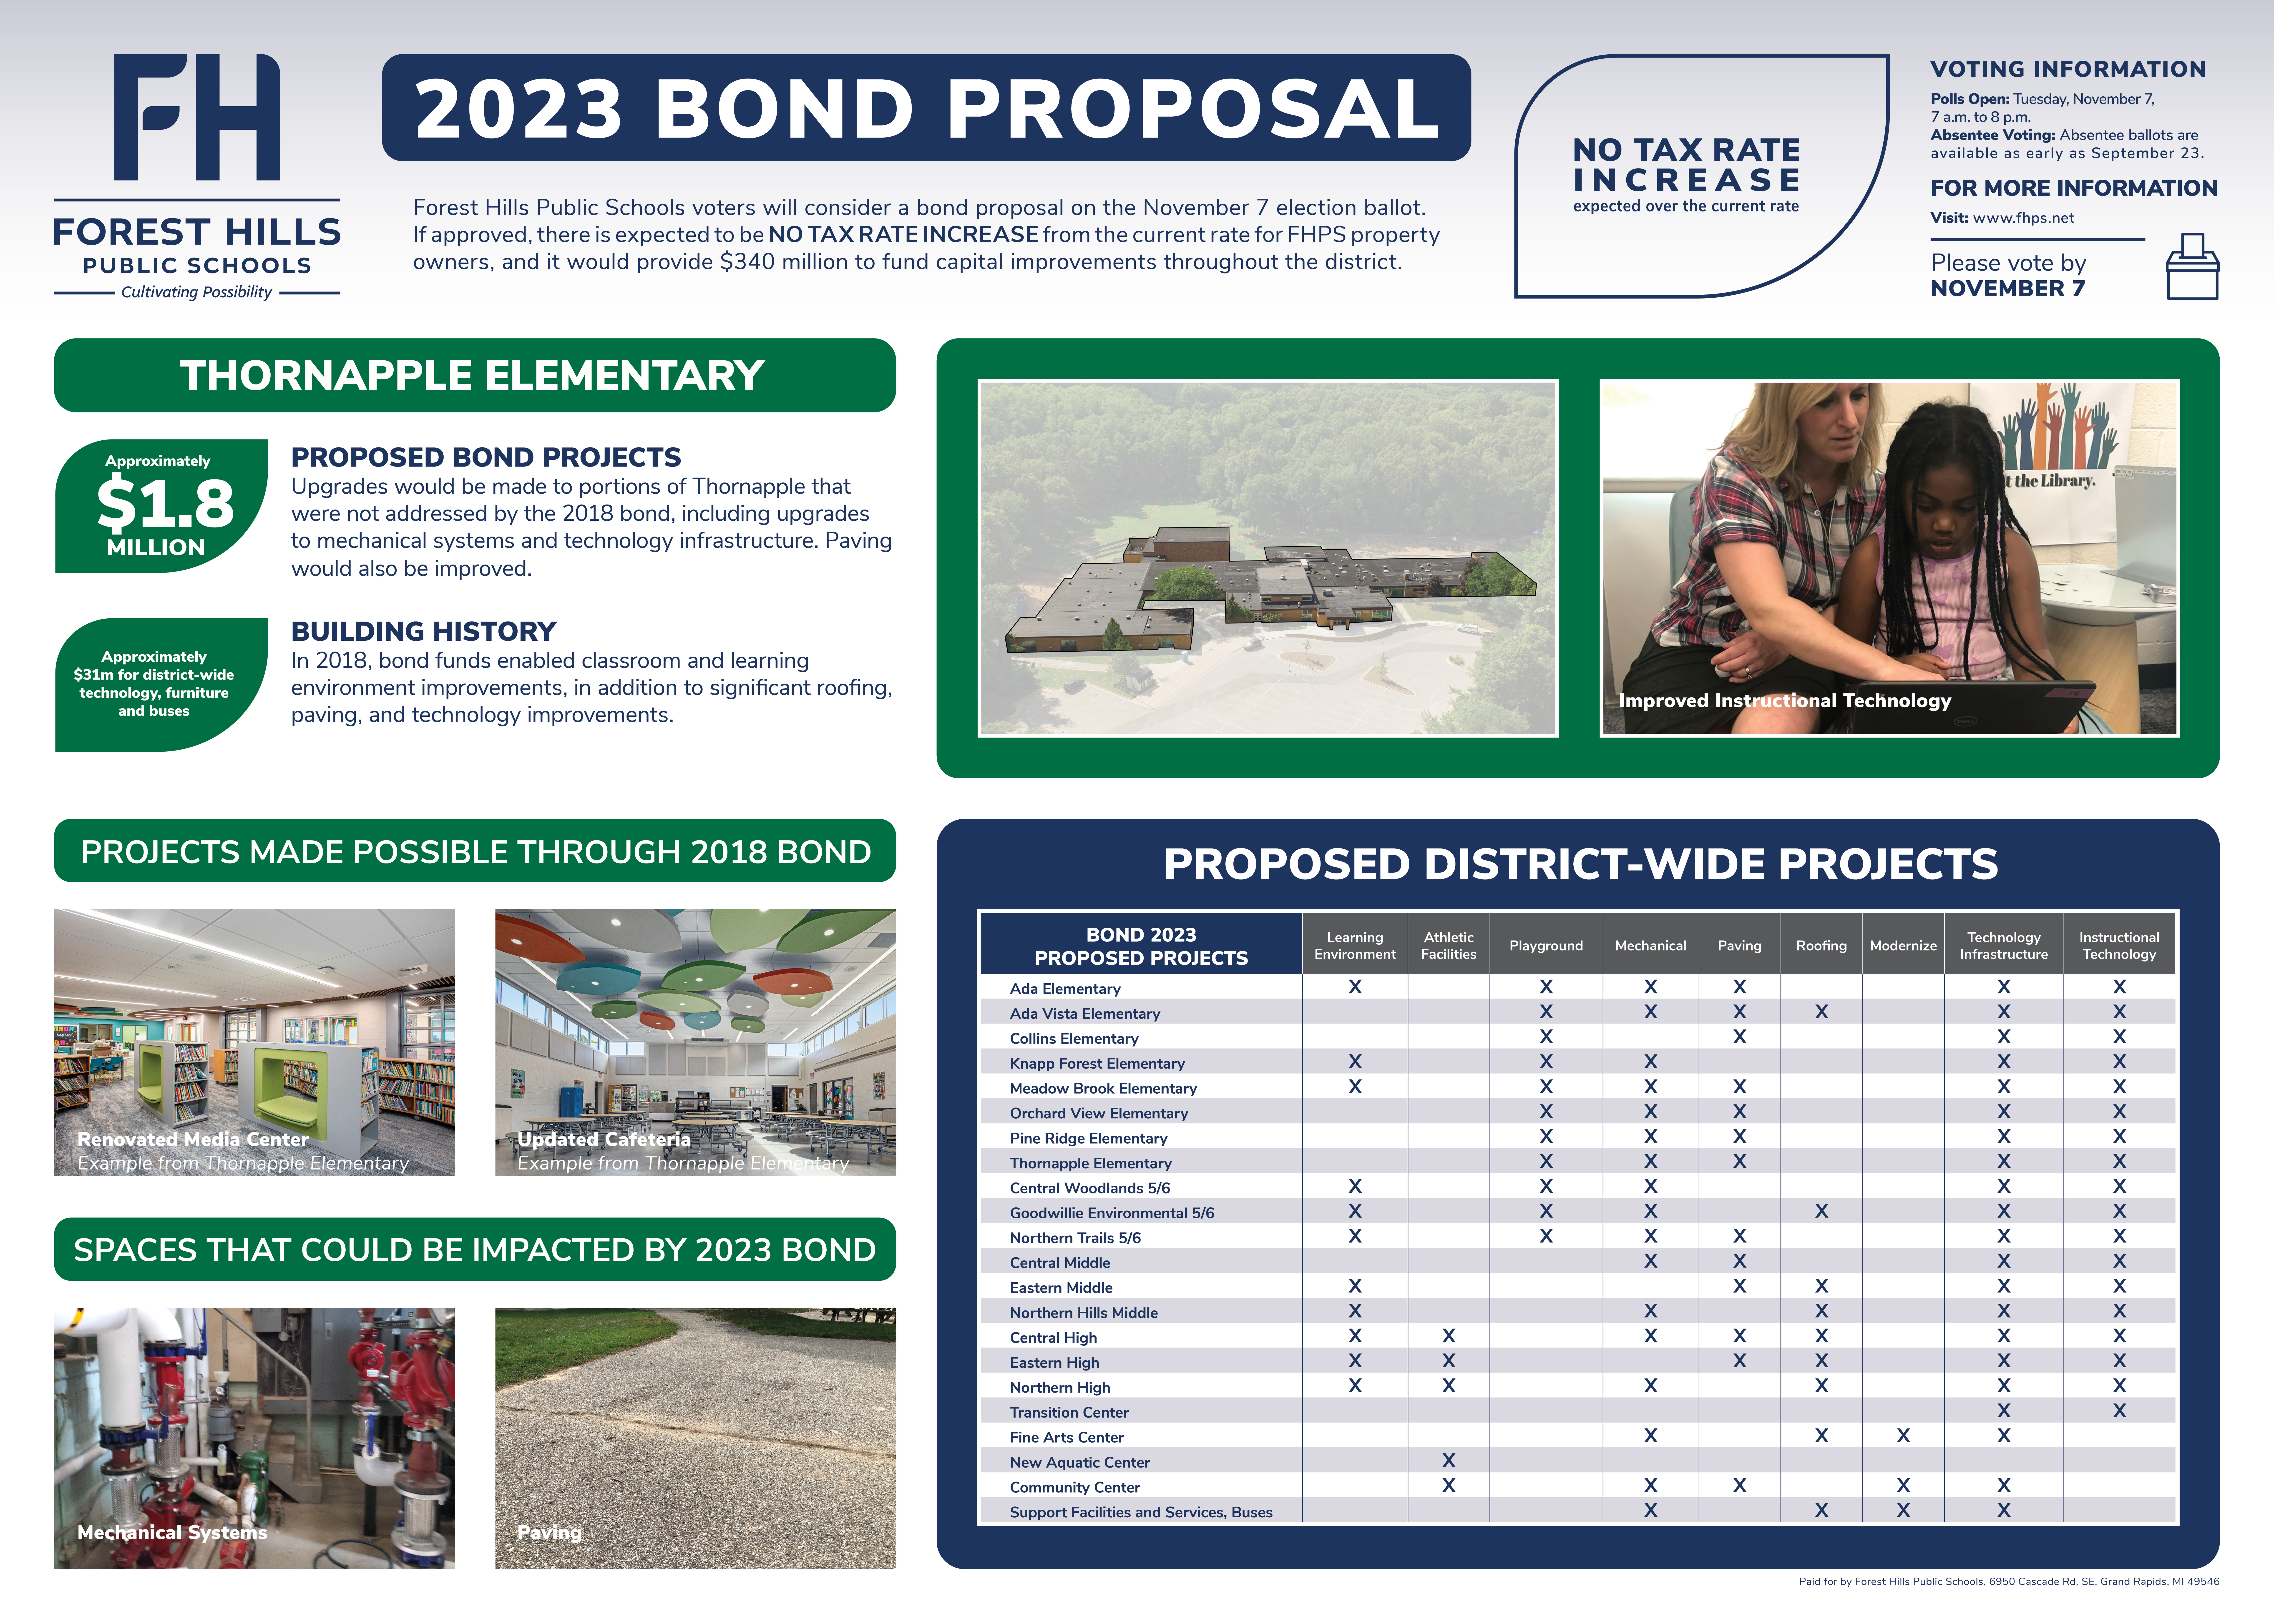 Thornapple Elementary and pictures of the existing building and bond project pictures from 2018 and spaces that could be impacted by the 2023 bond.